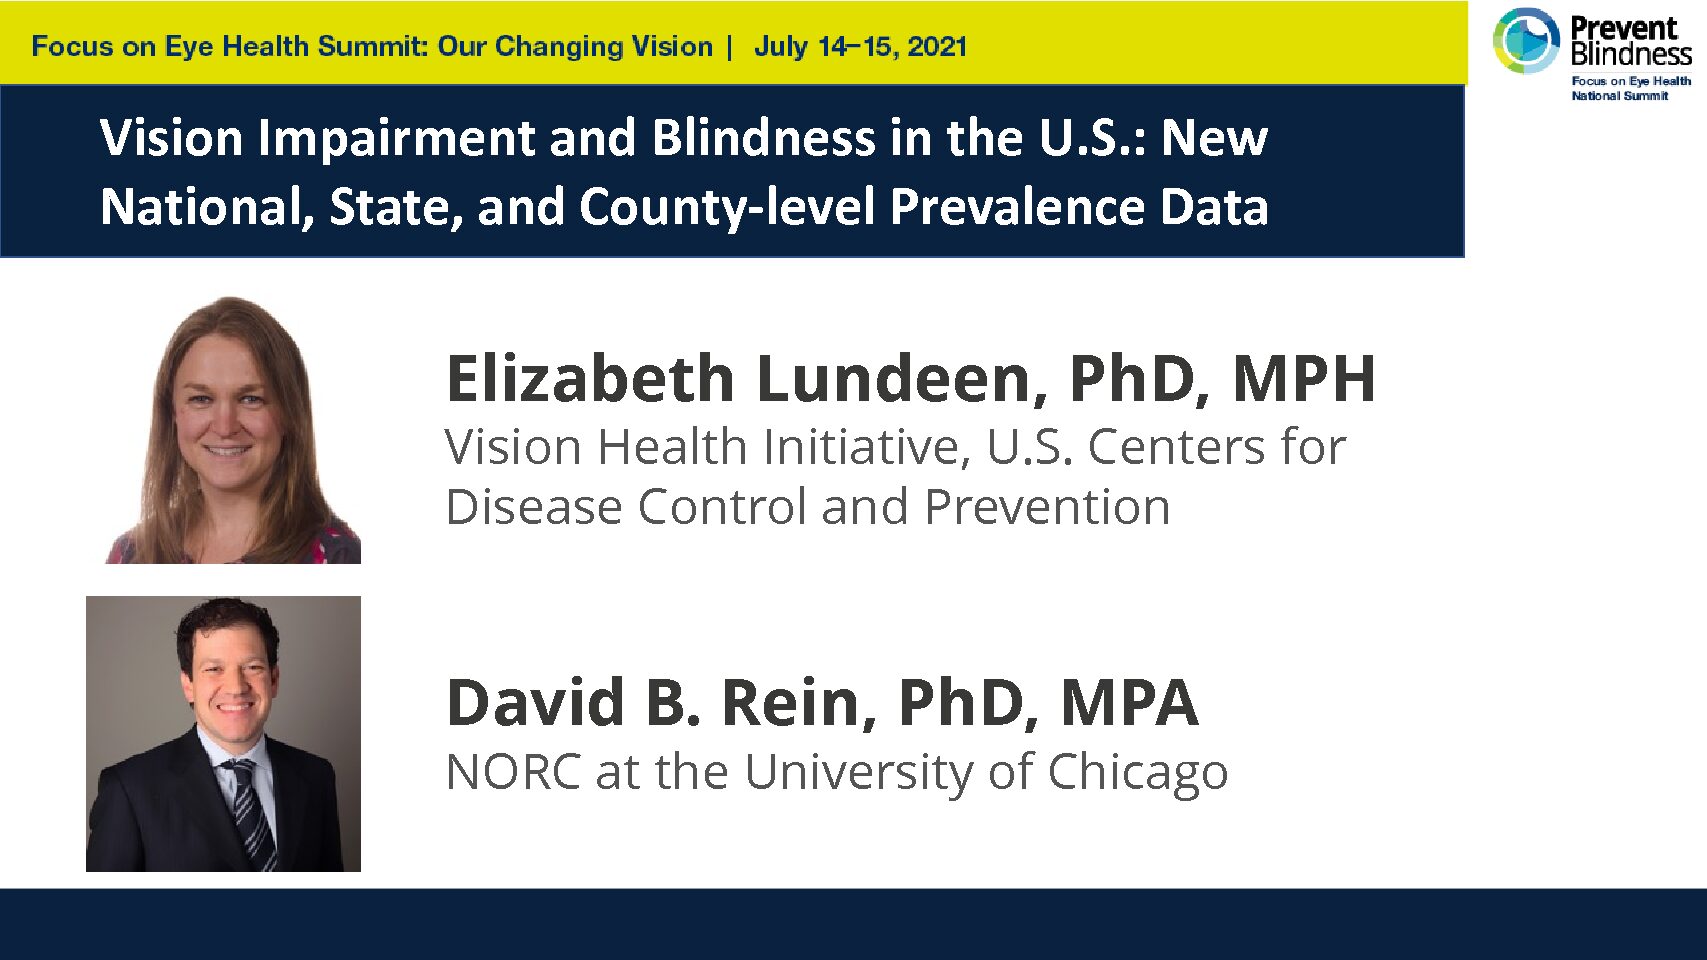 Vision Impairment and Blindness in the U.S.: New National, State, and County-level Prevalence Data